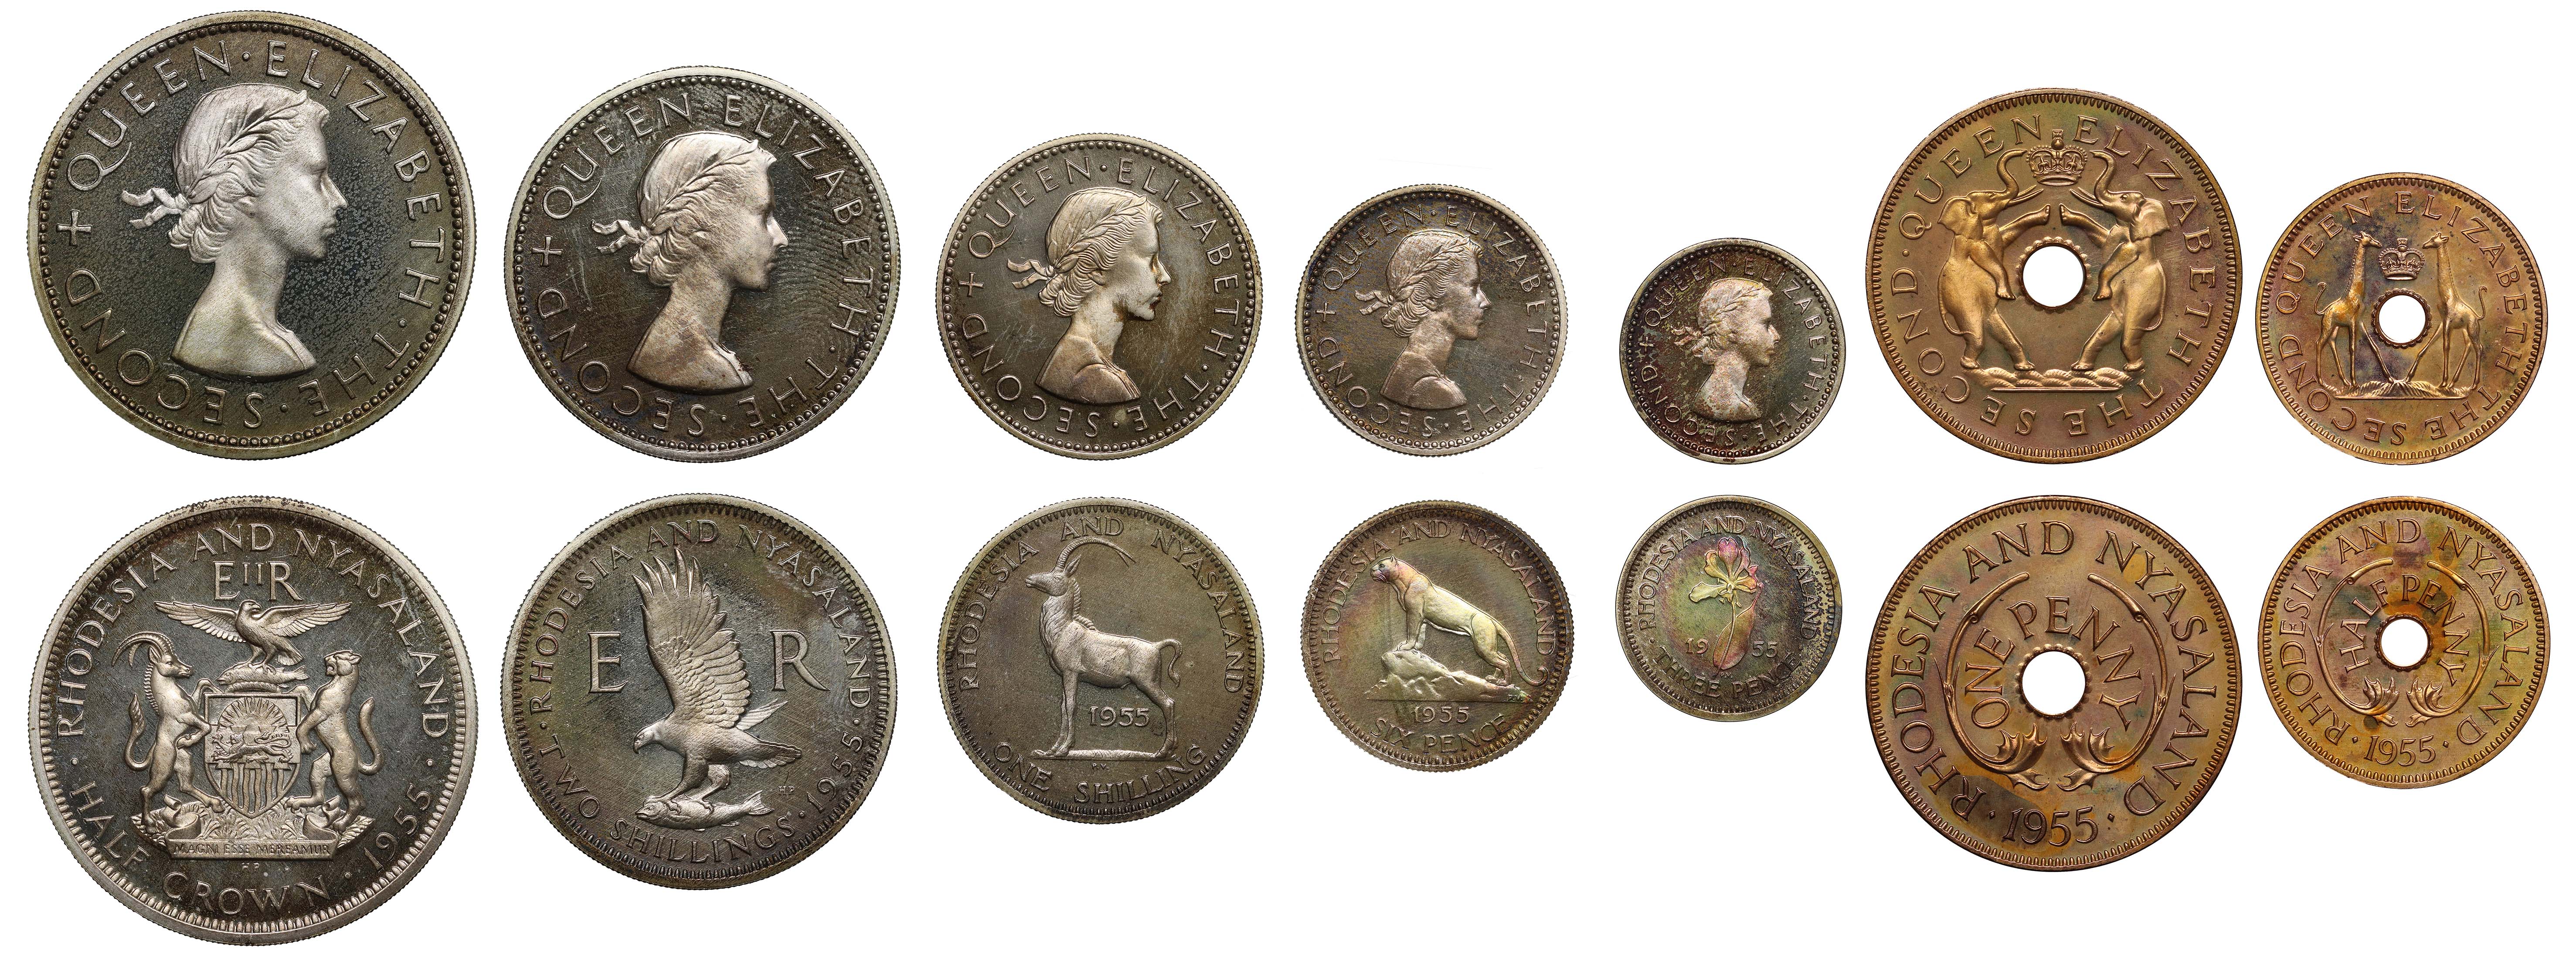 Rhodesia and Nyasaland, Elizabeth II (1952-64), silver and bronze proof 7-coin Set, 1955, consisting